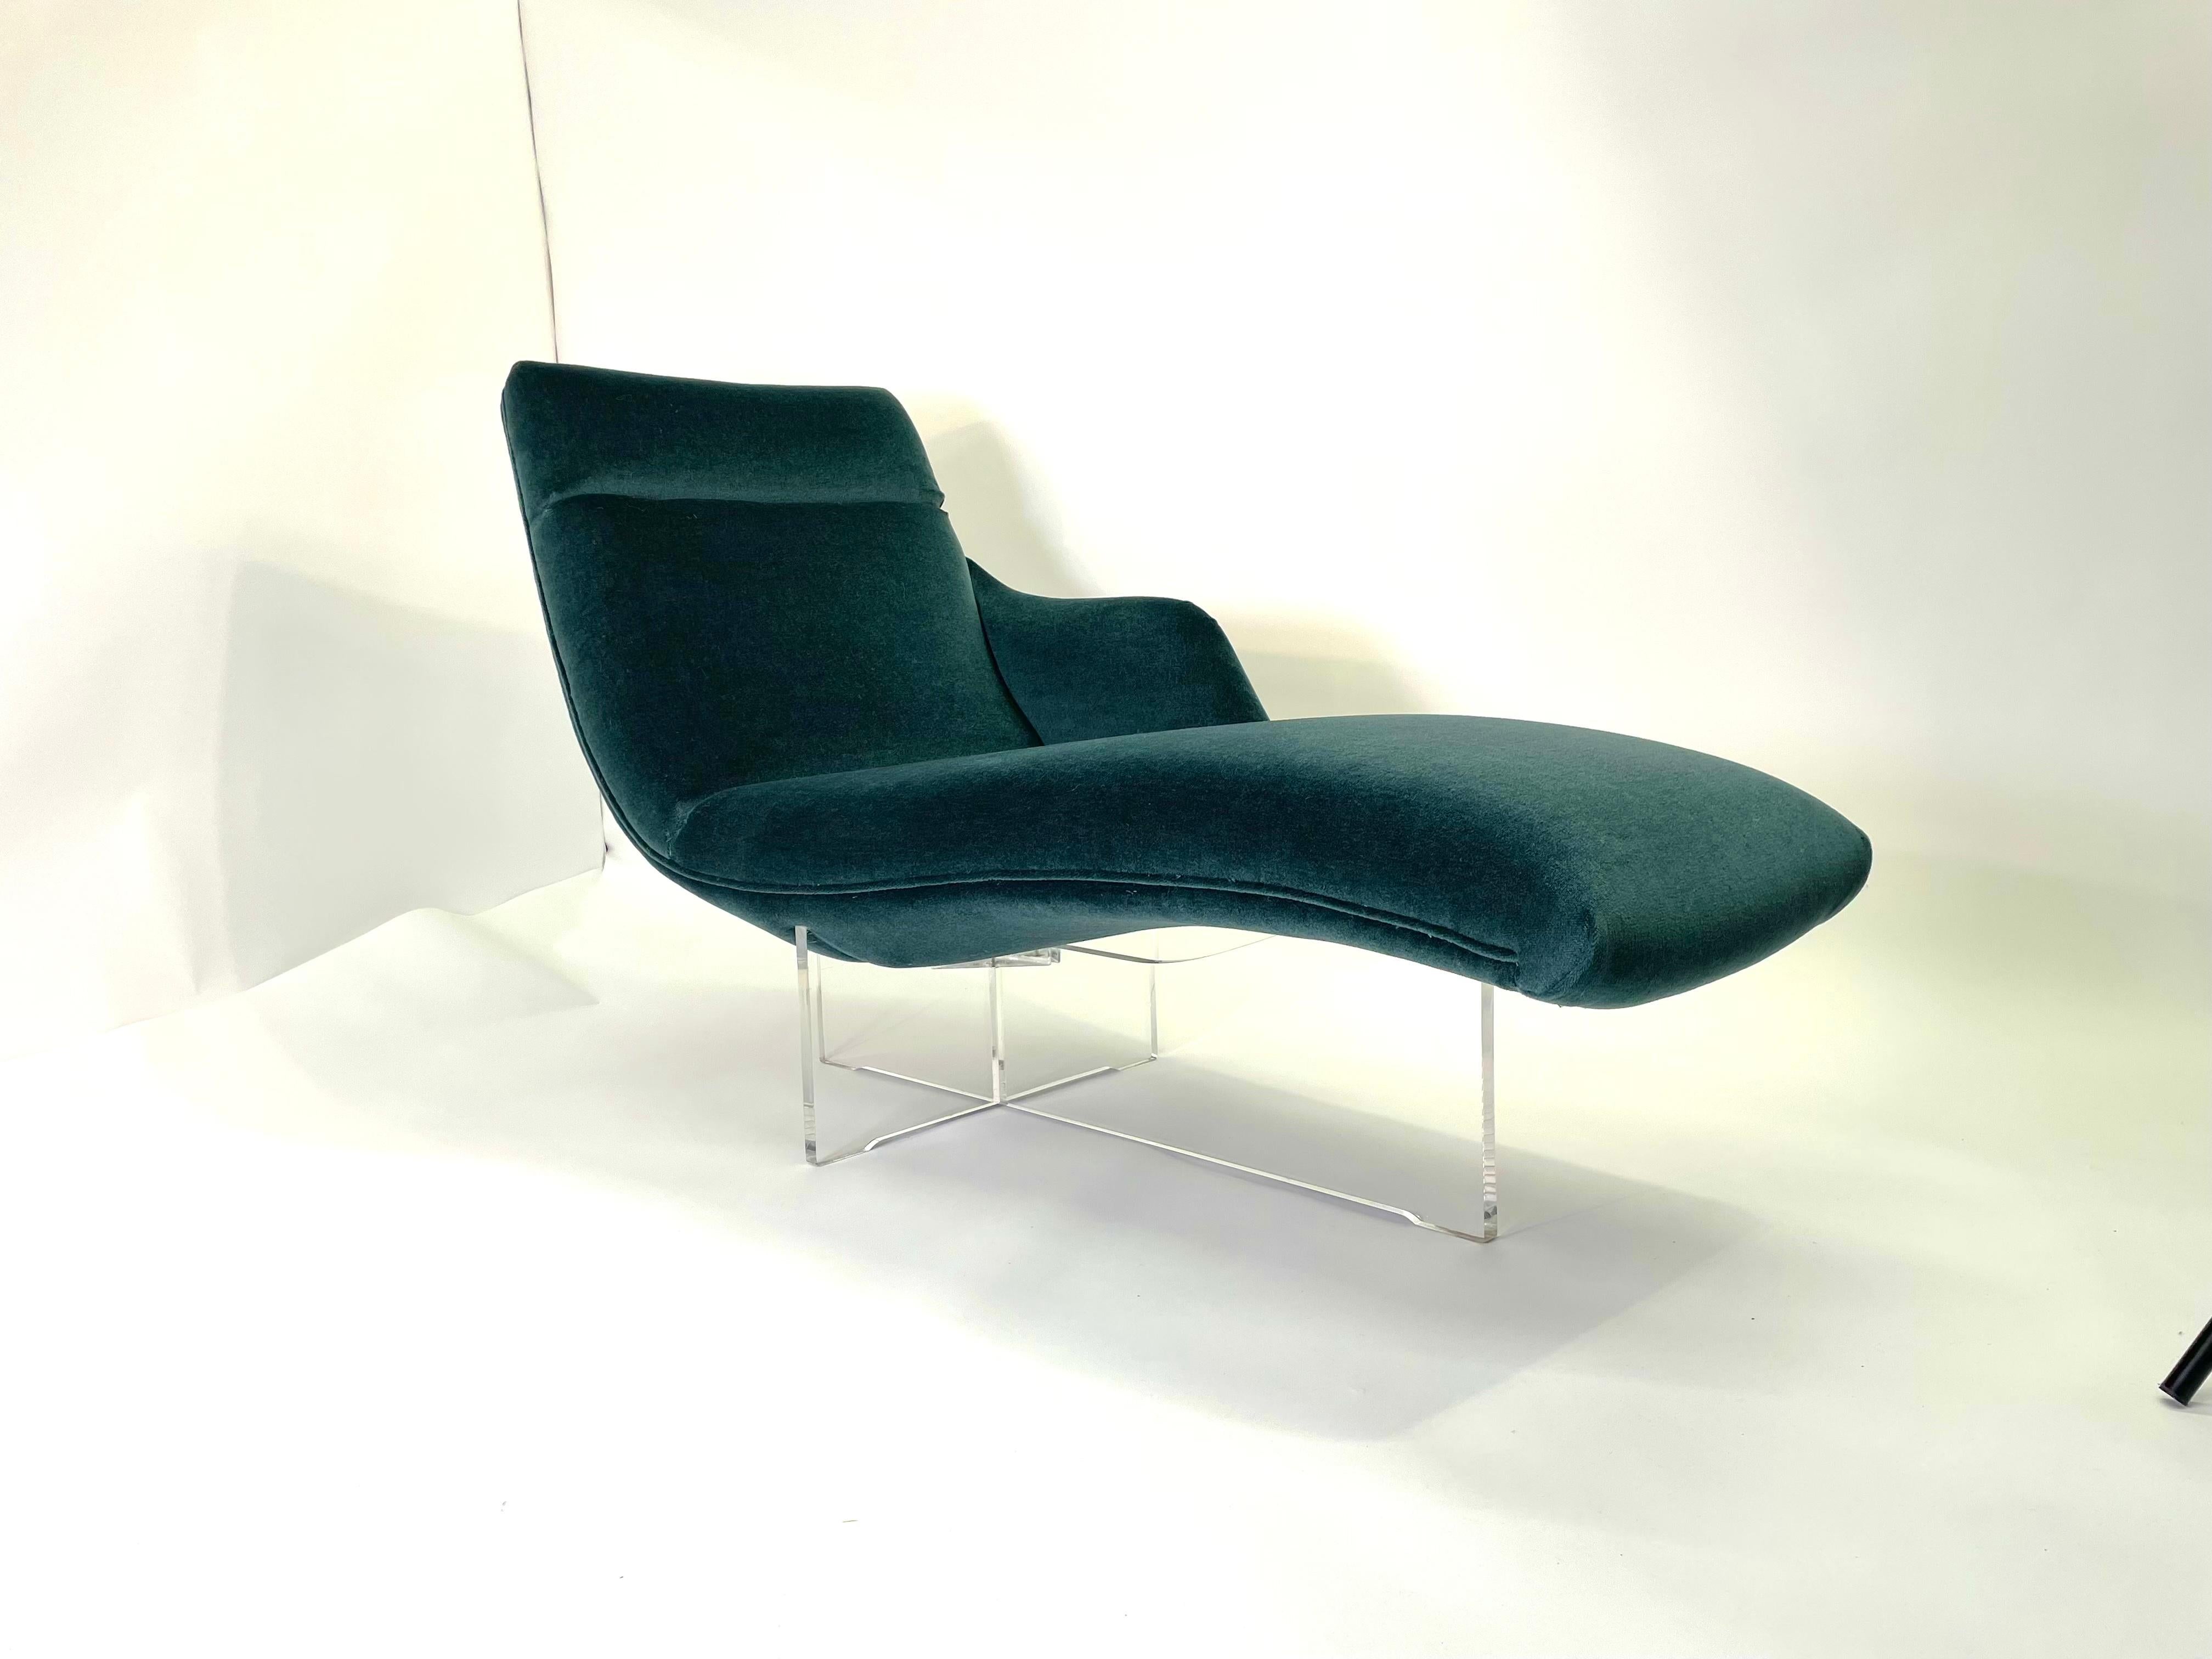 Vladimir Kagan Erica Chaise Lounge Chair in Mohair In Excellent Condition For Sale In San Diego, CA